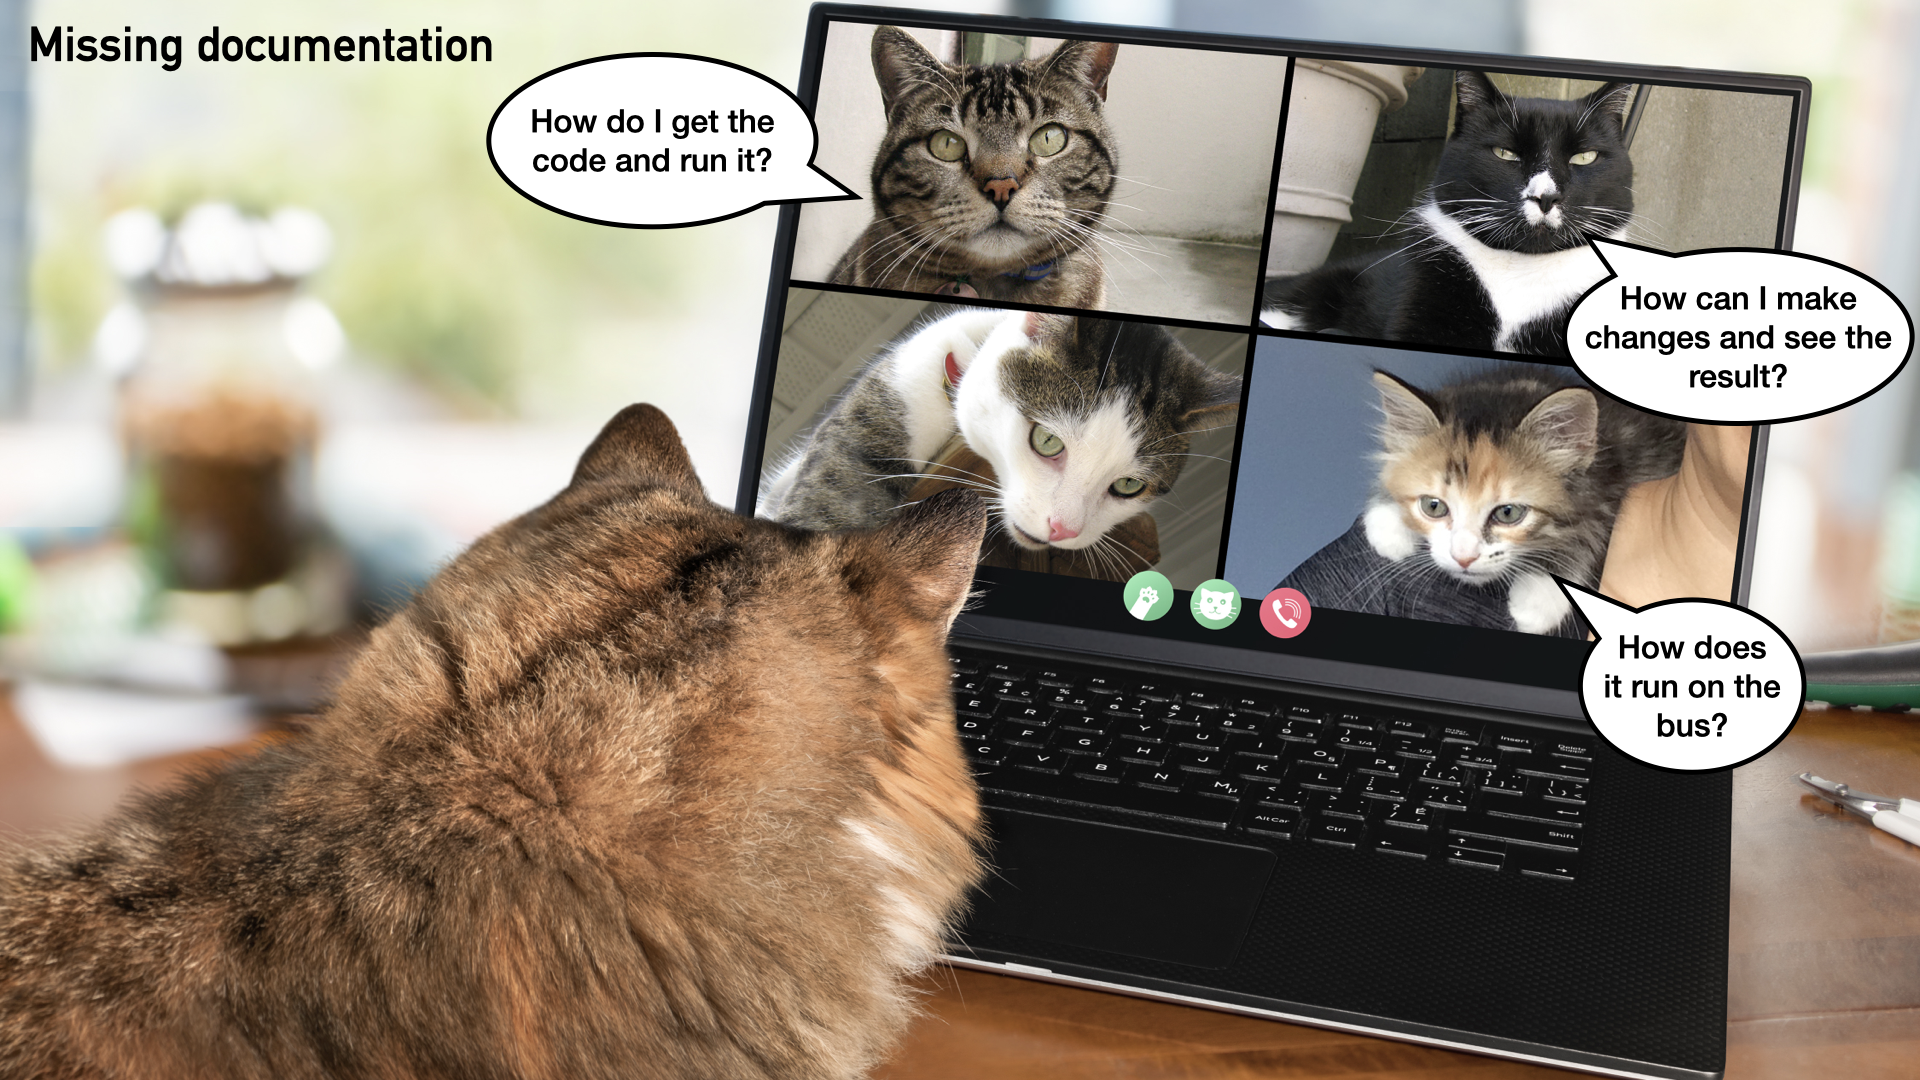 photo of a cat using a laptop to participate in a video call with other cats. The other cats have speech bubbles with the questions asked about missing documentation.